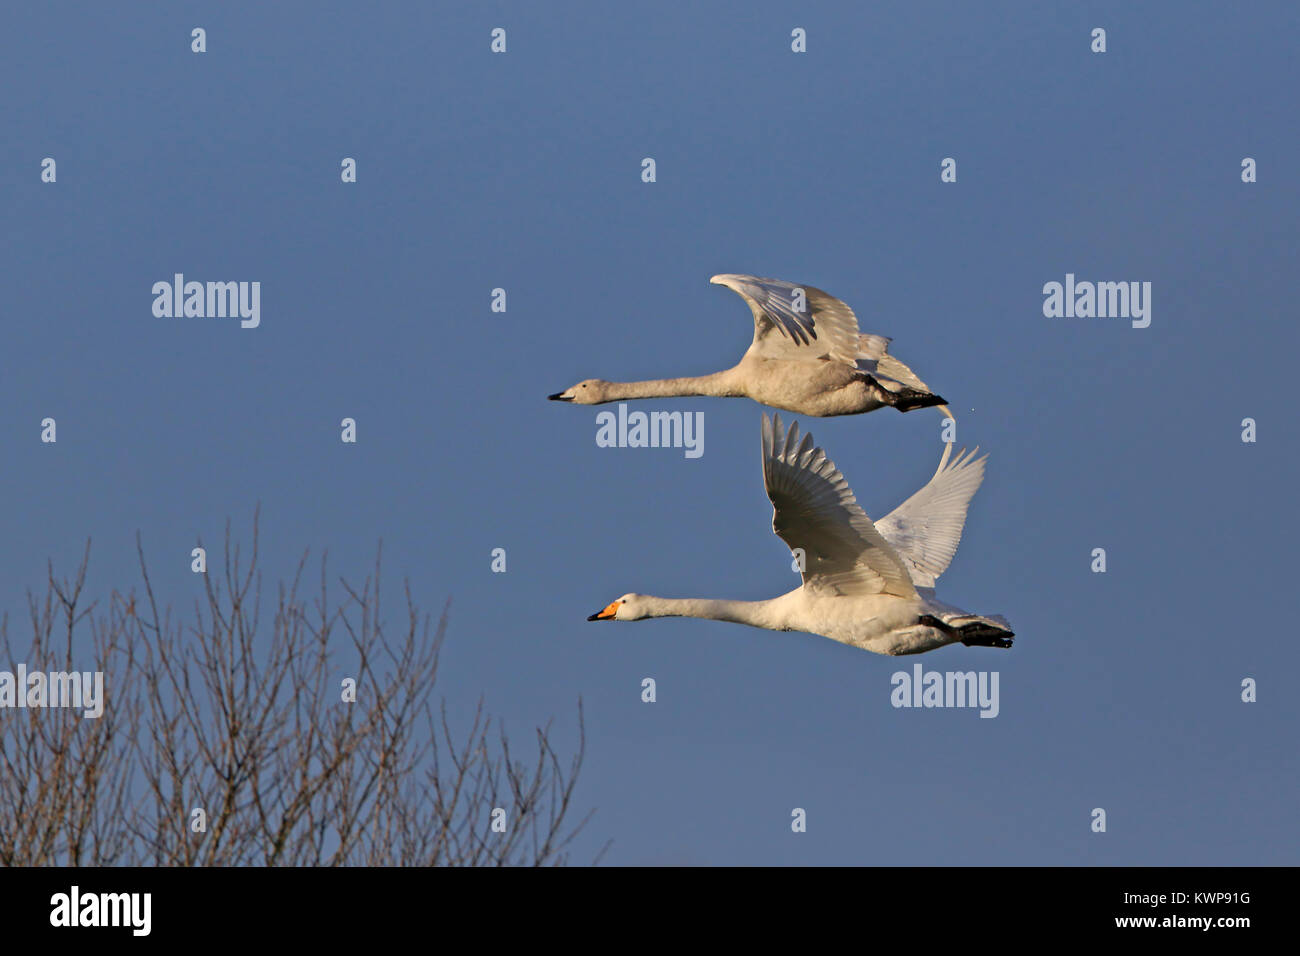 Two Whooper Swans in flight Stock Photo